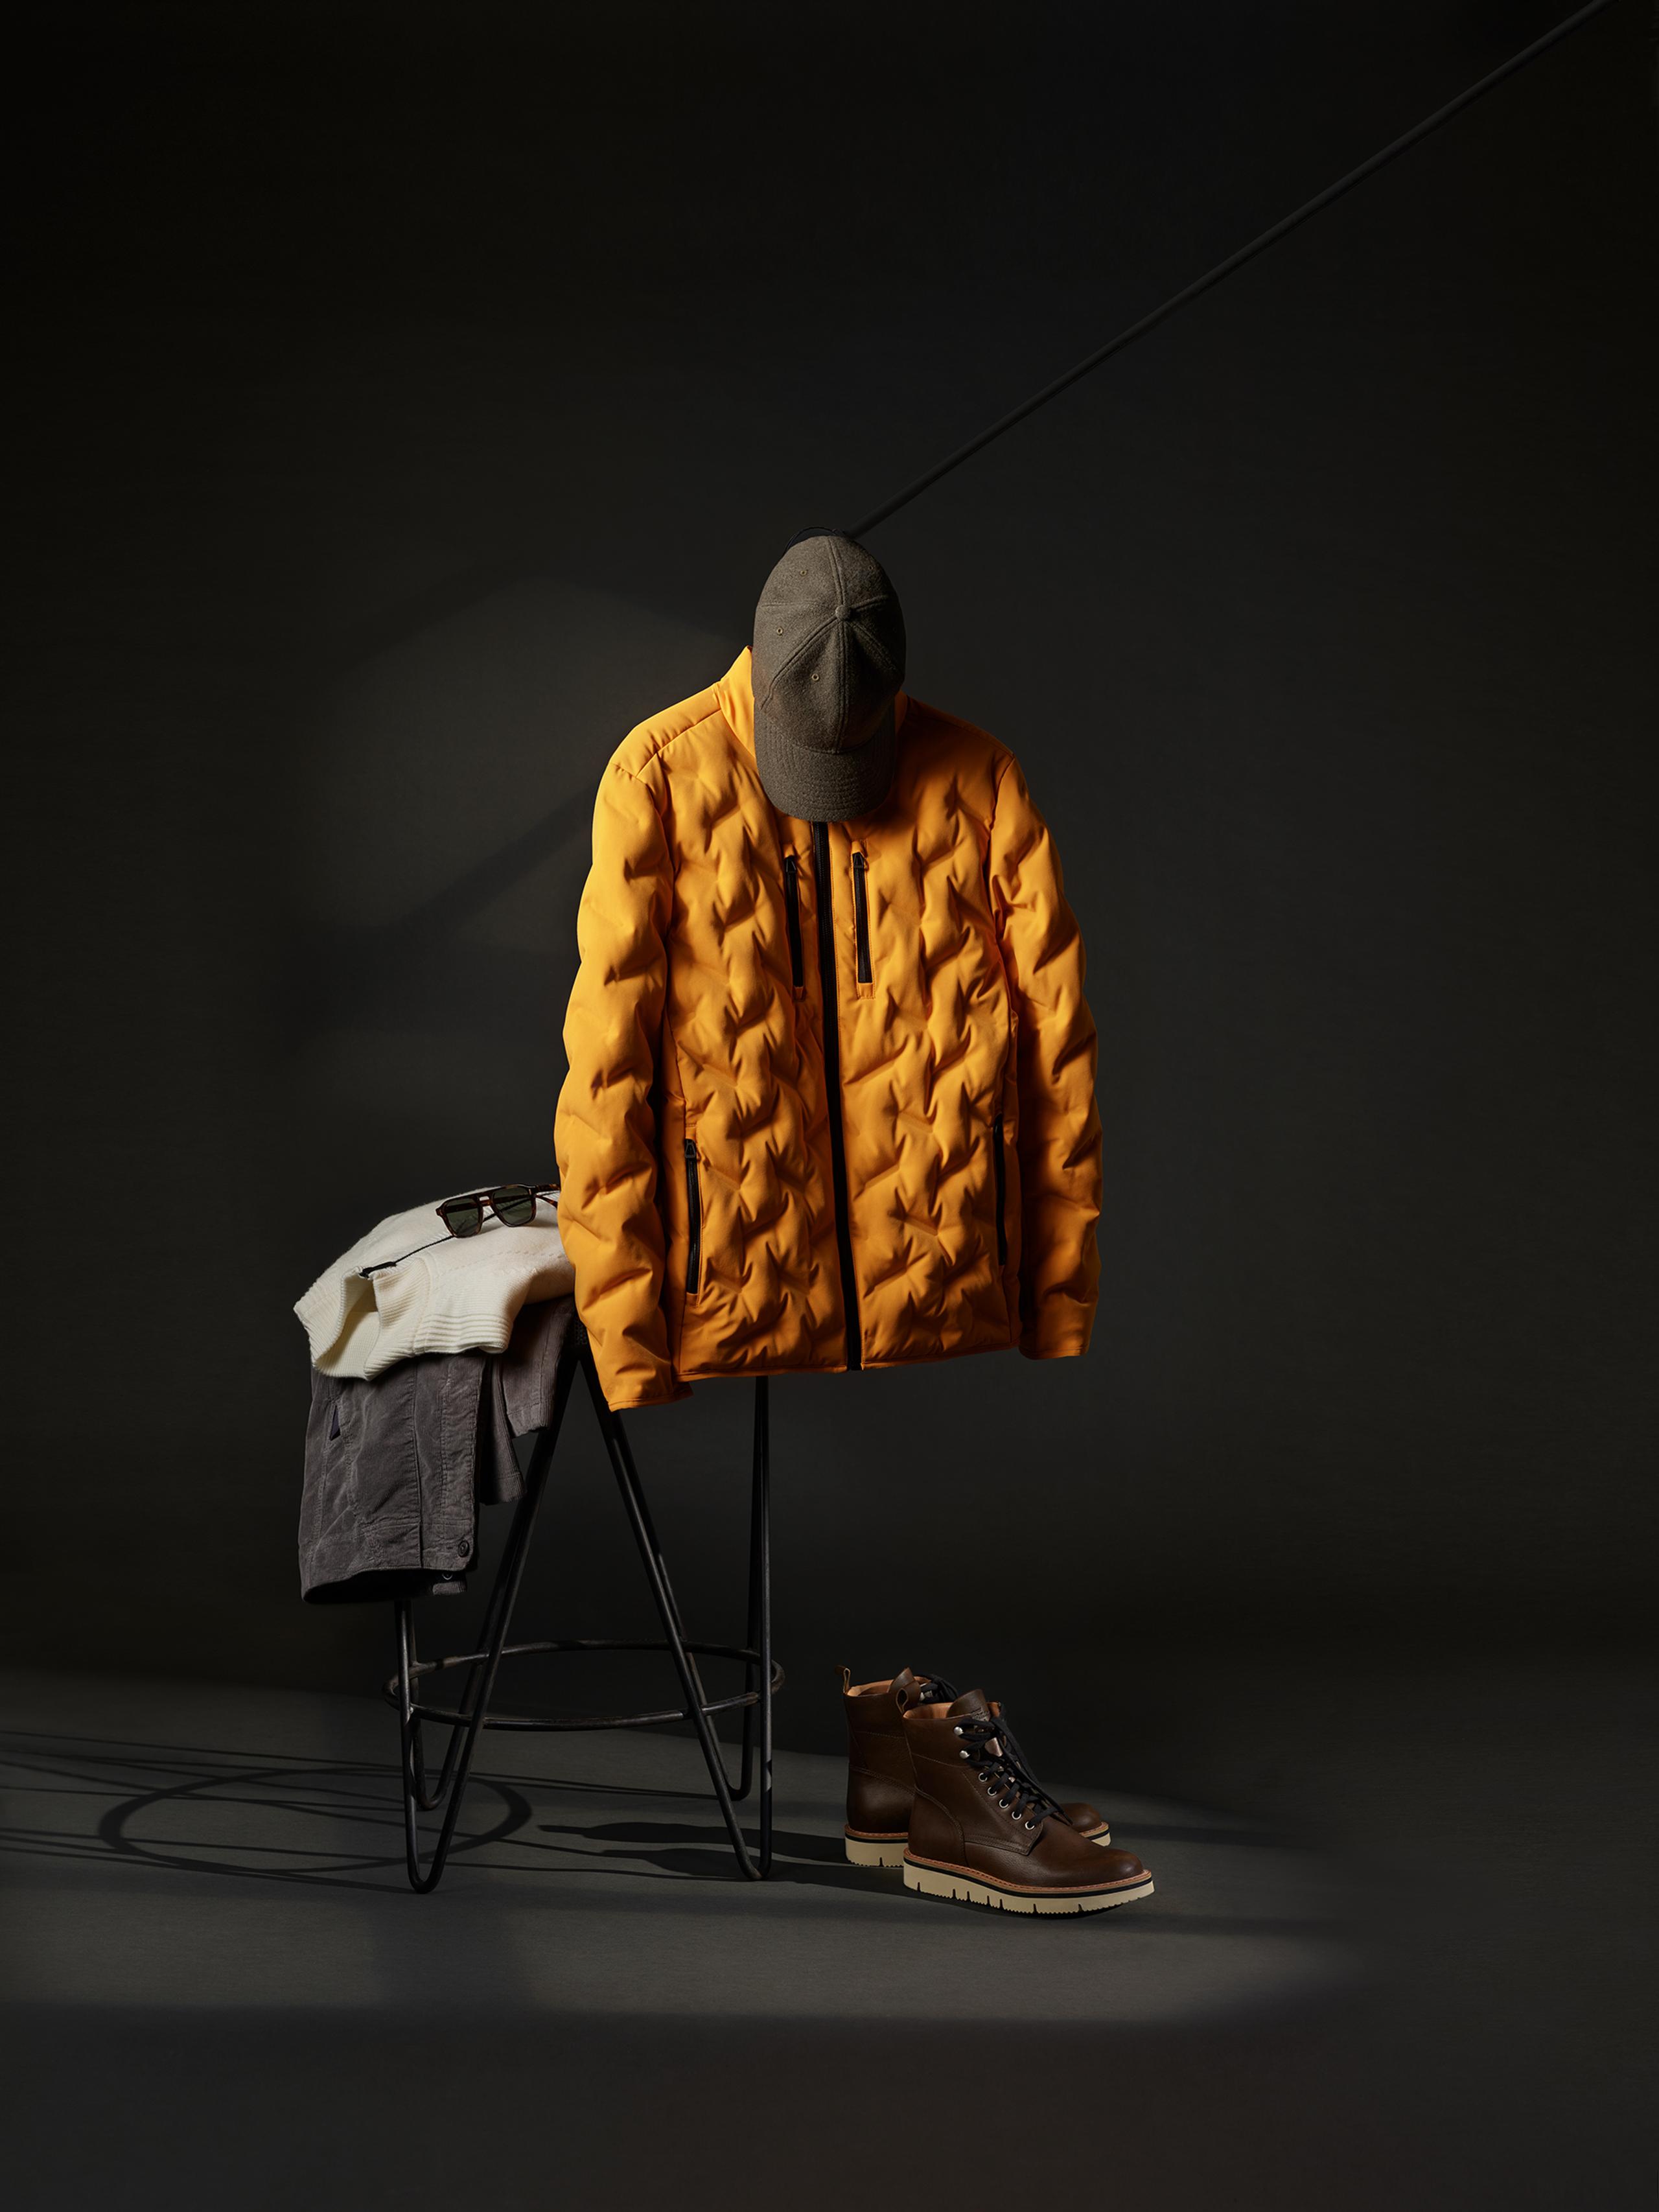 Studio setup of AETHER men's outfit hanging and resting on chair against black background